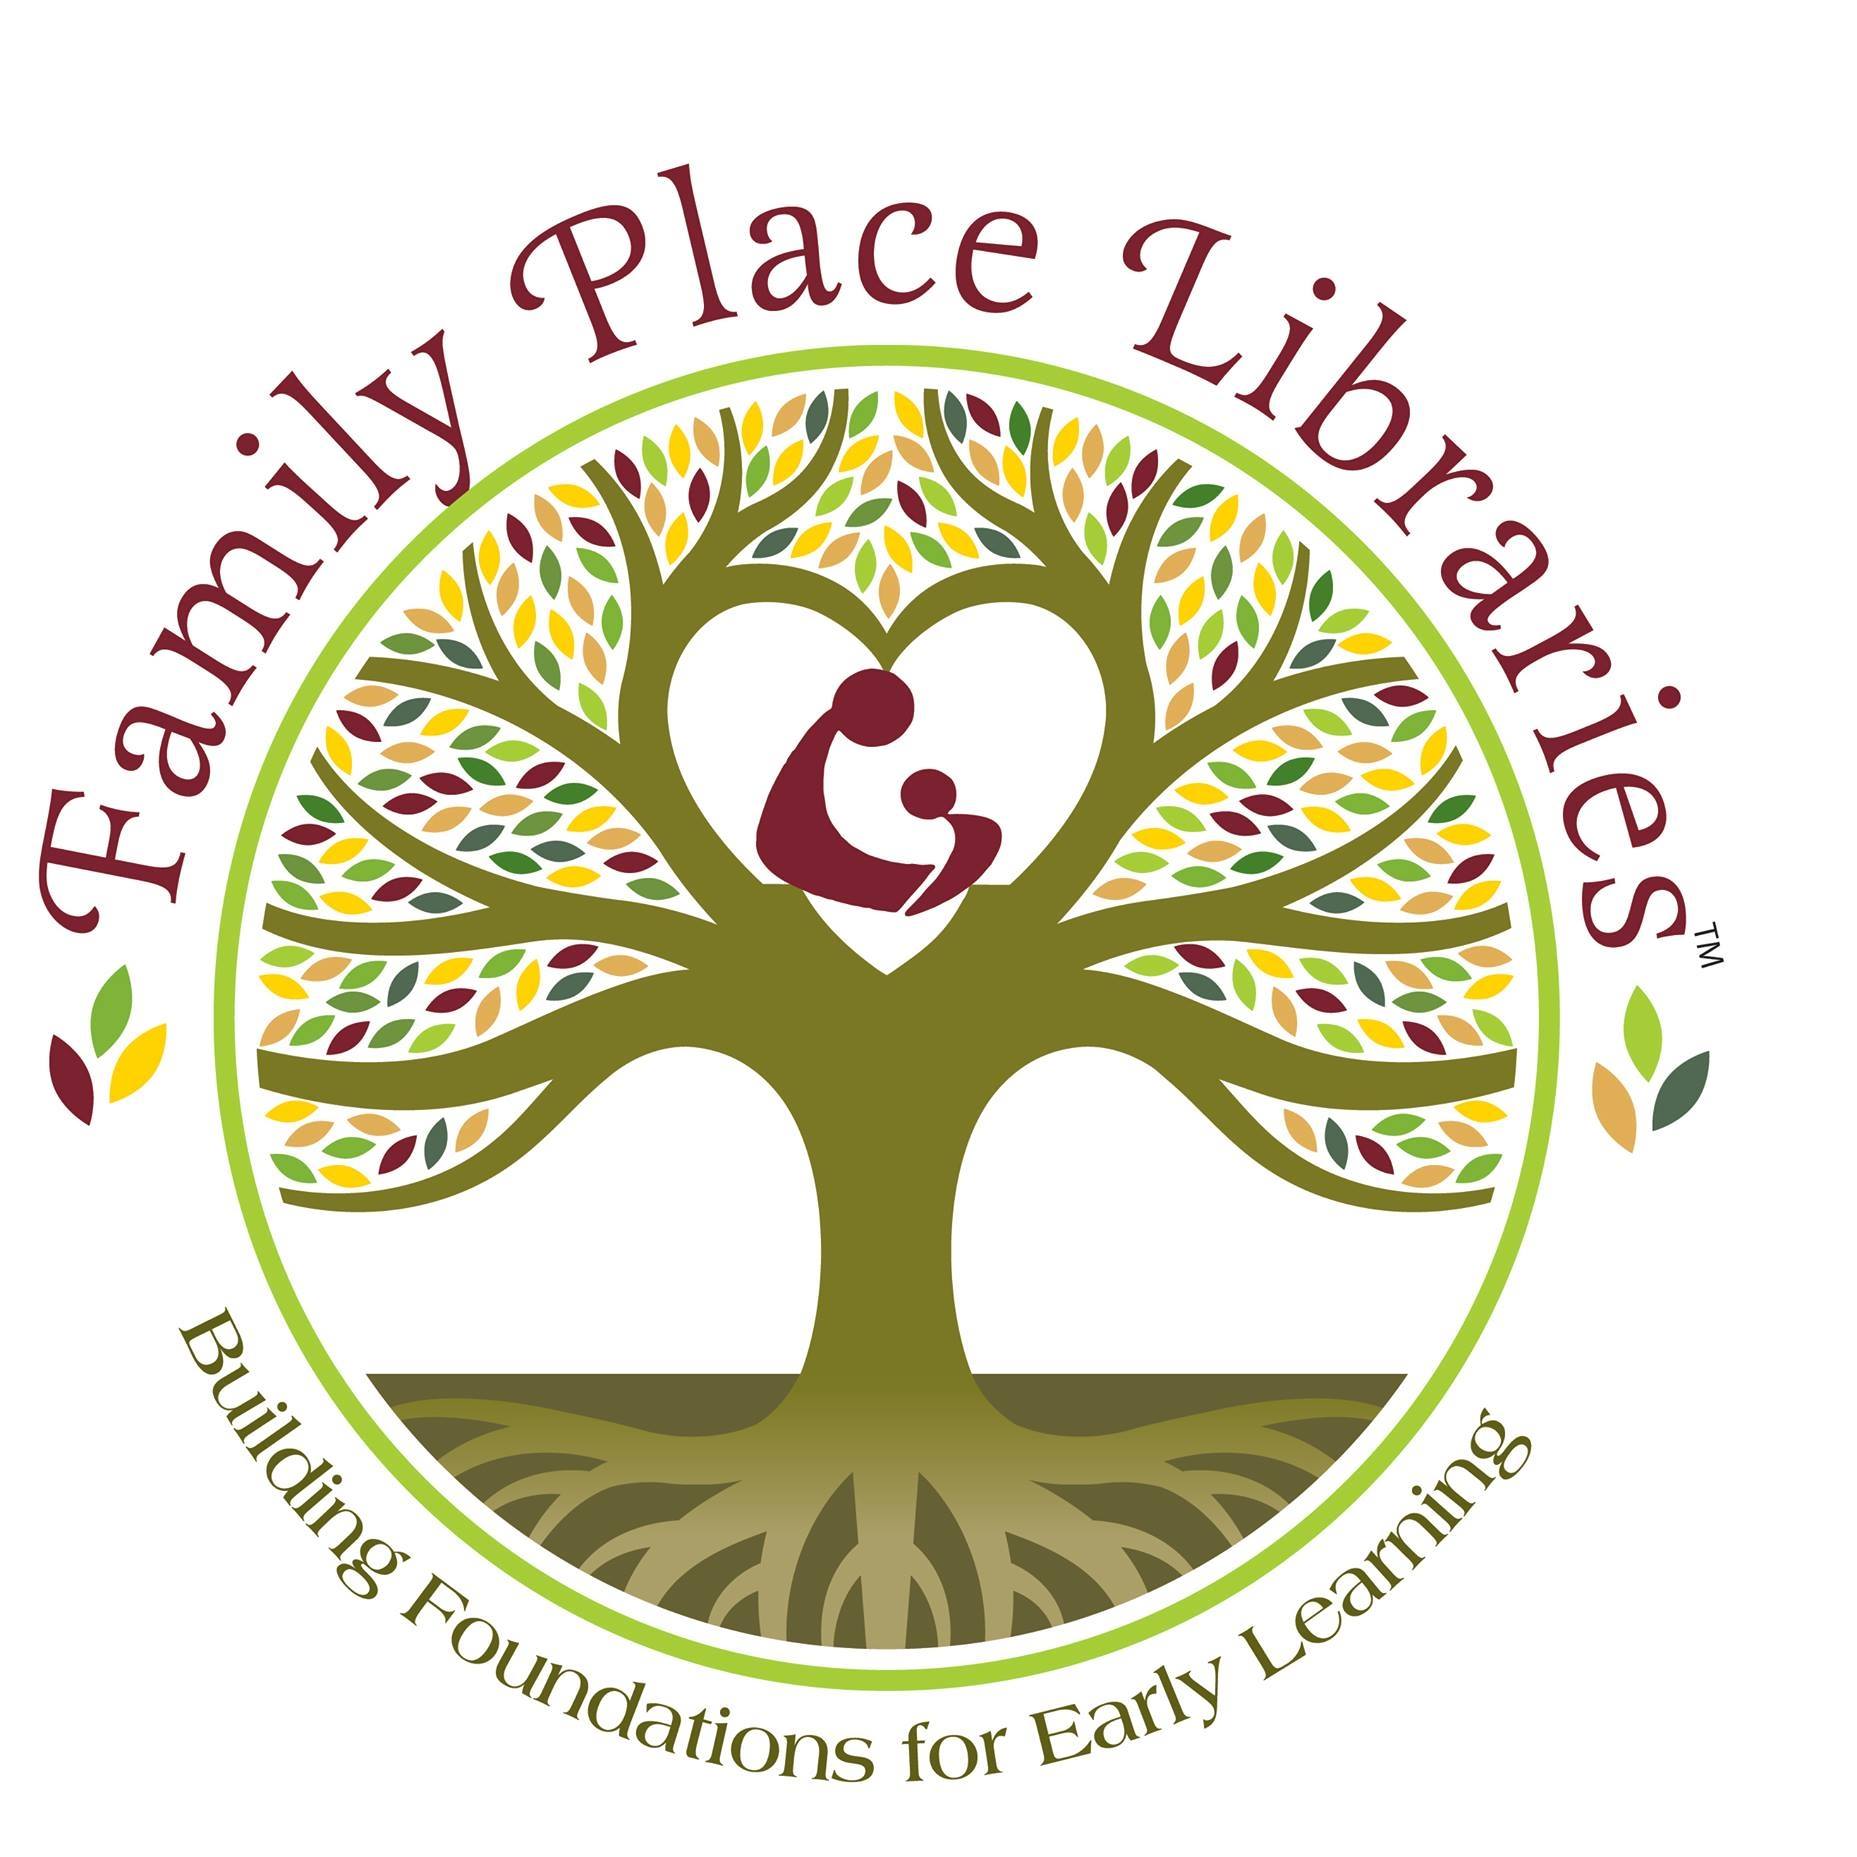 Family Place Libraries logo.